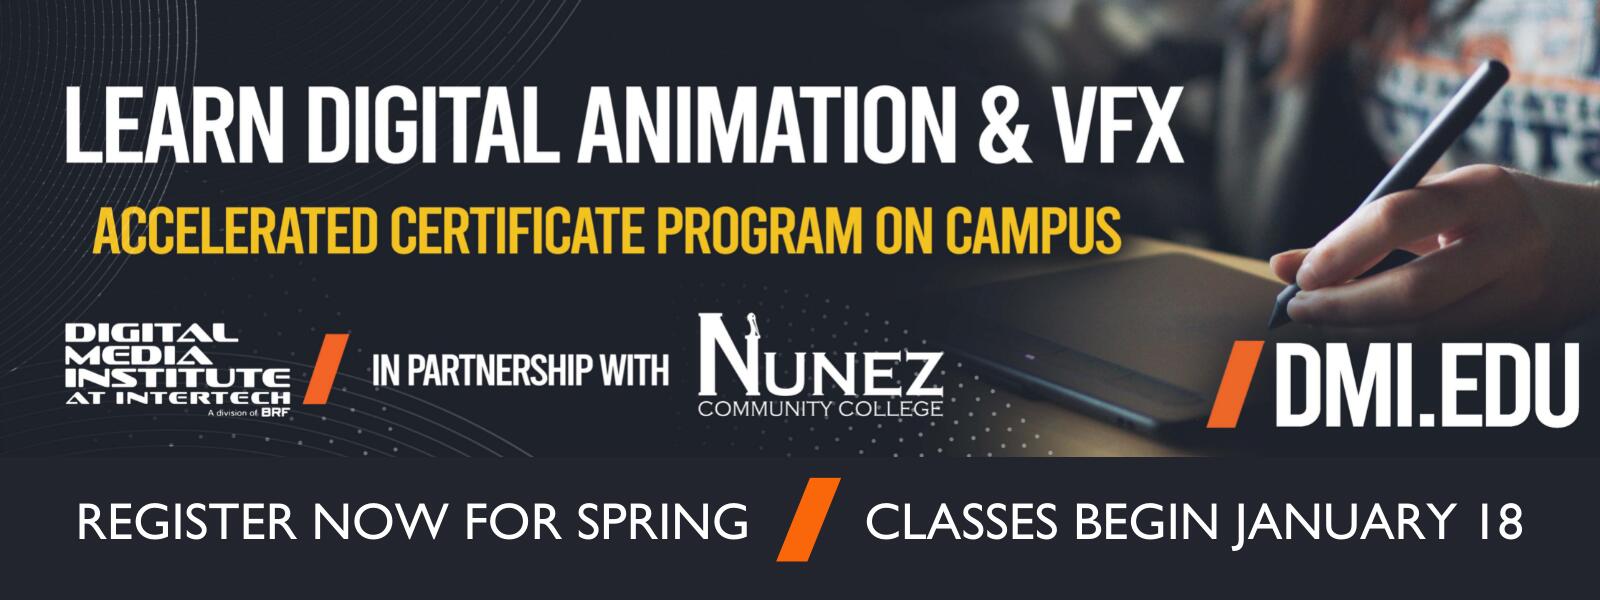 Learn Digital Animation & VFX:  Classes Begin January 18th, Click Here for More Information